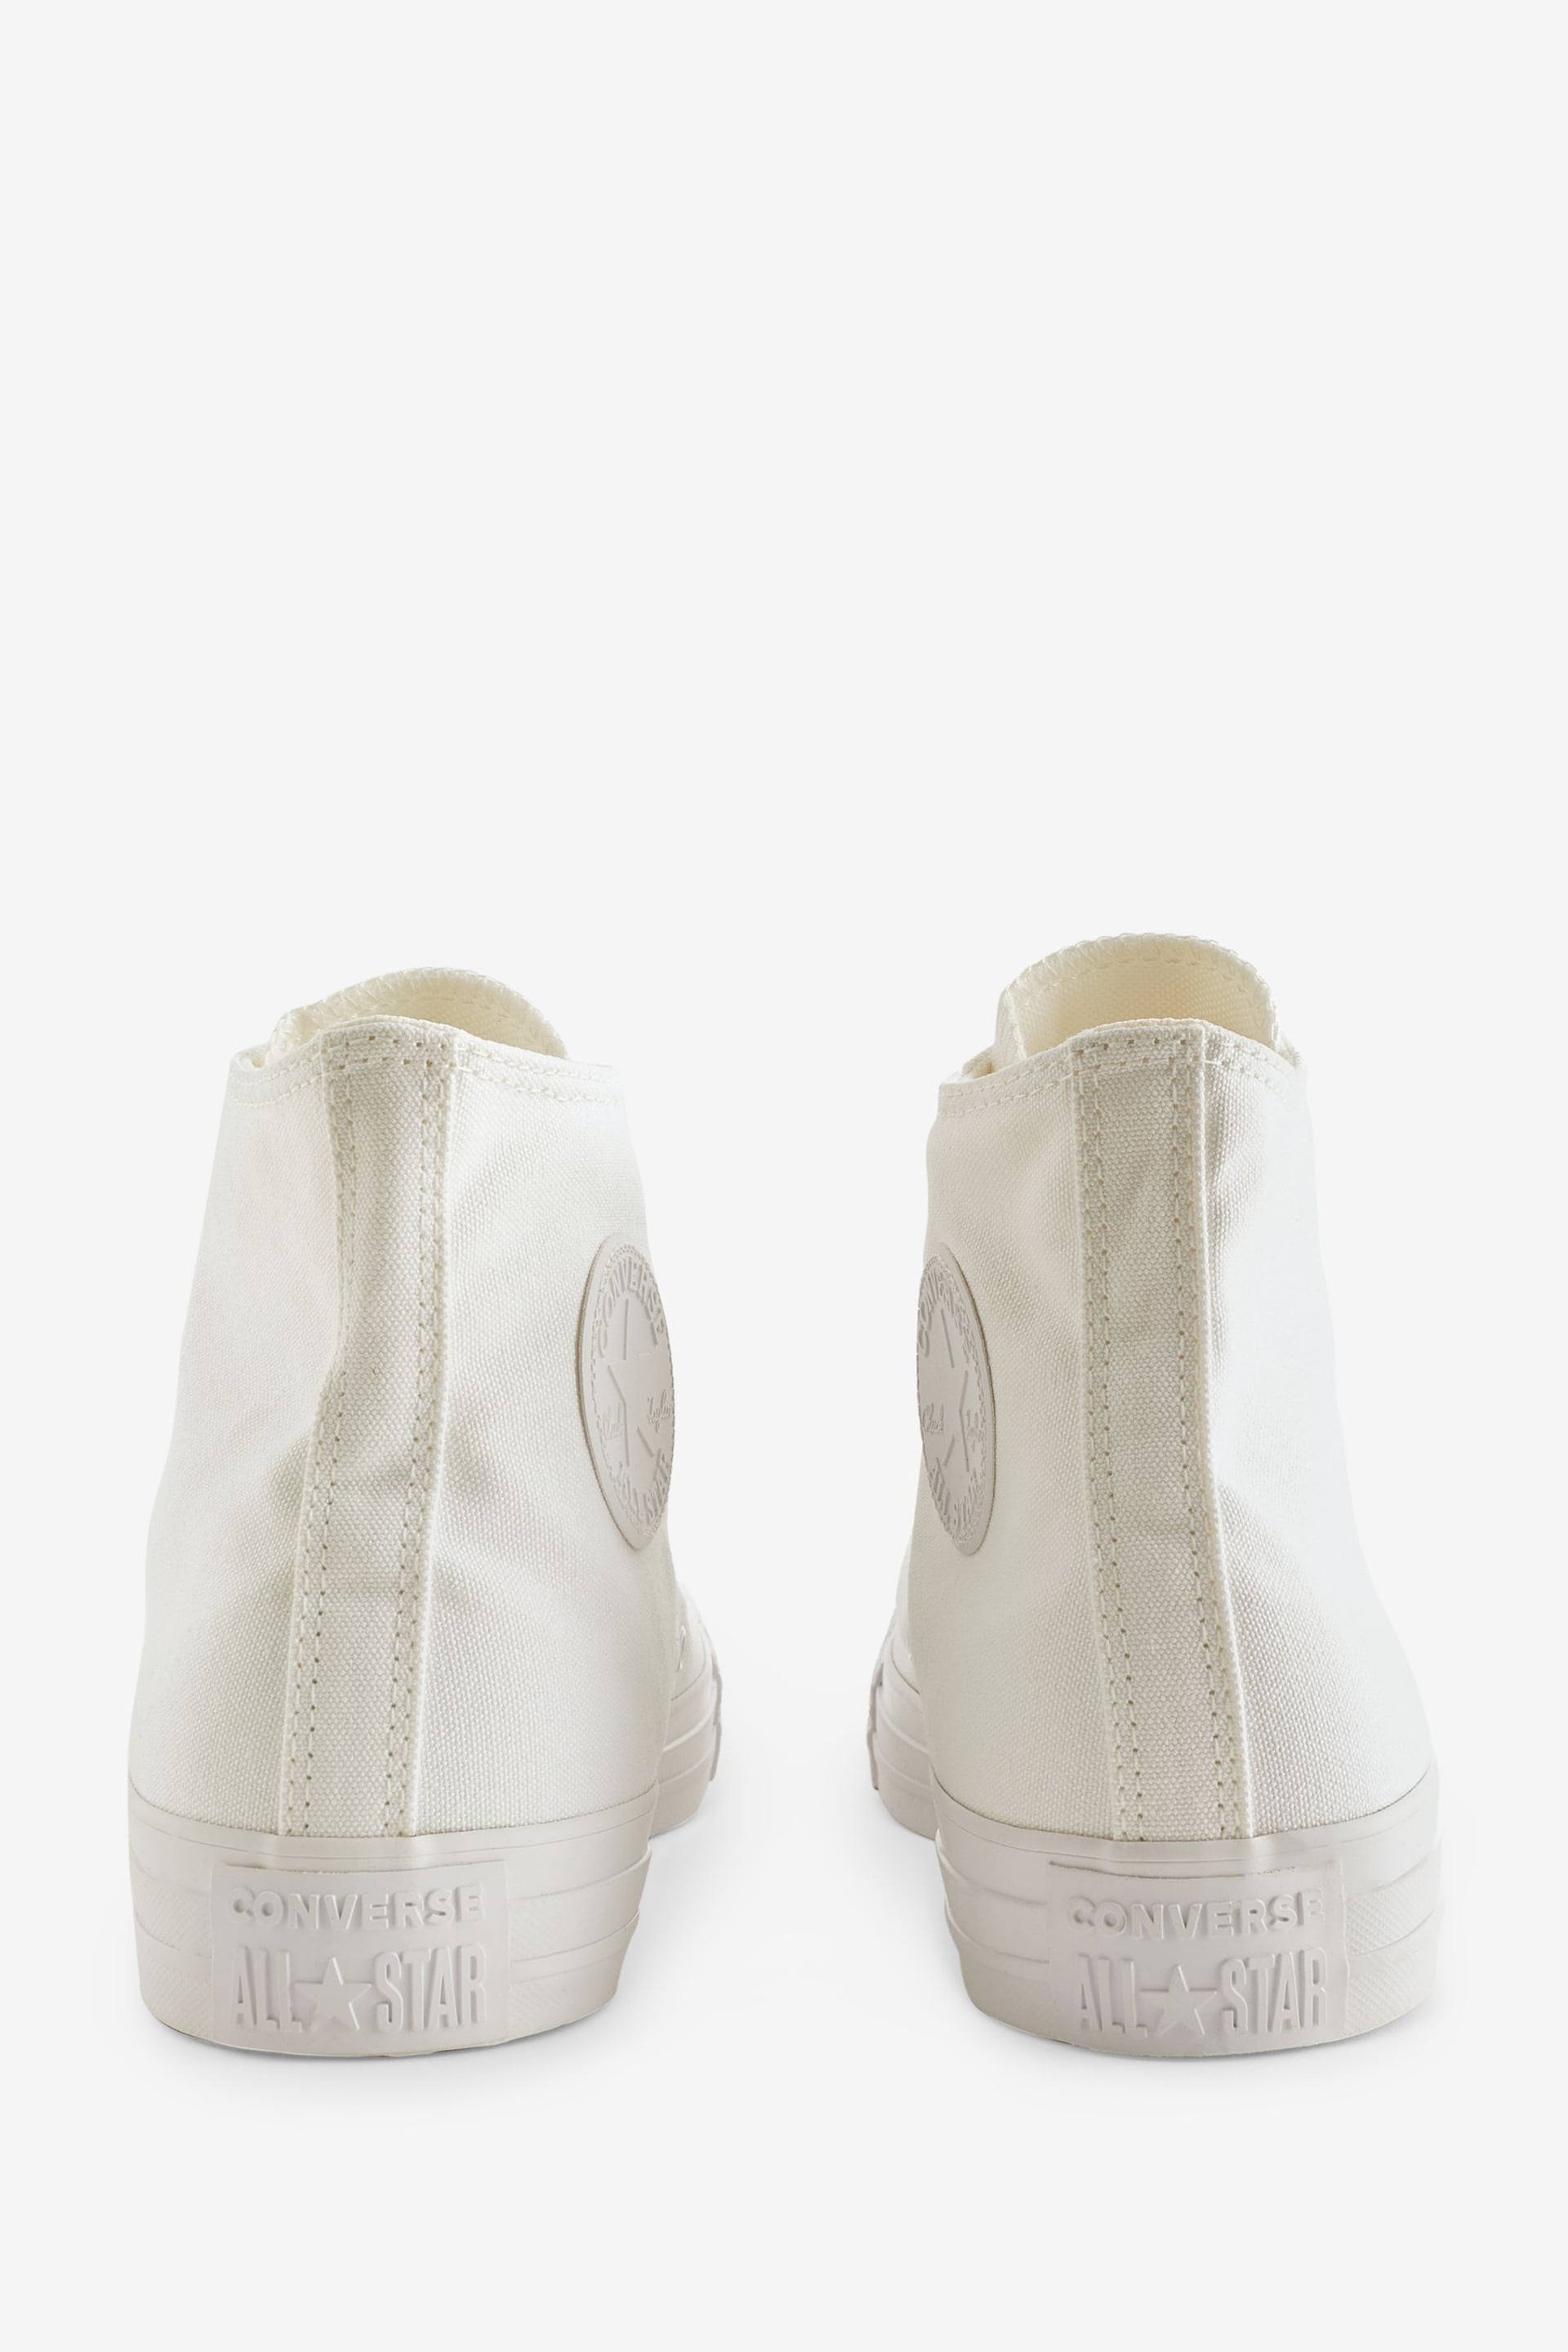 Converse White Chuck High Trainers - Image 4 of 9